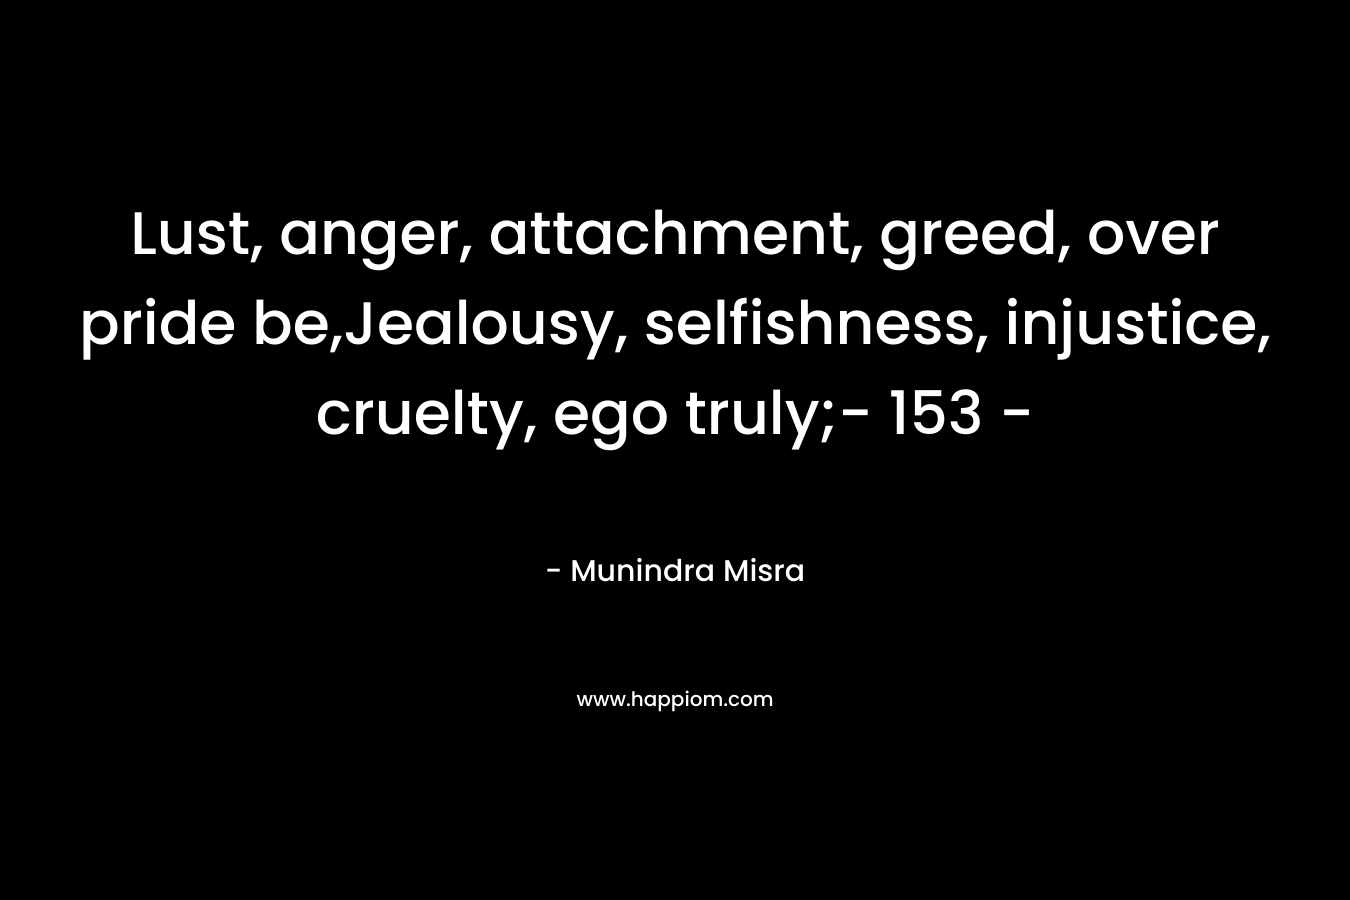 Lust, anger, attachment, greed, over pride be,Jealousy, selfishness, injustice, cruelty, ego truly;- 153 – – Munindra Misra